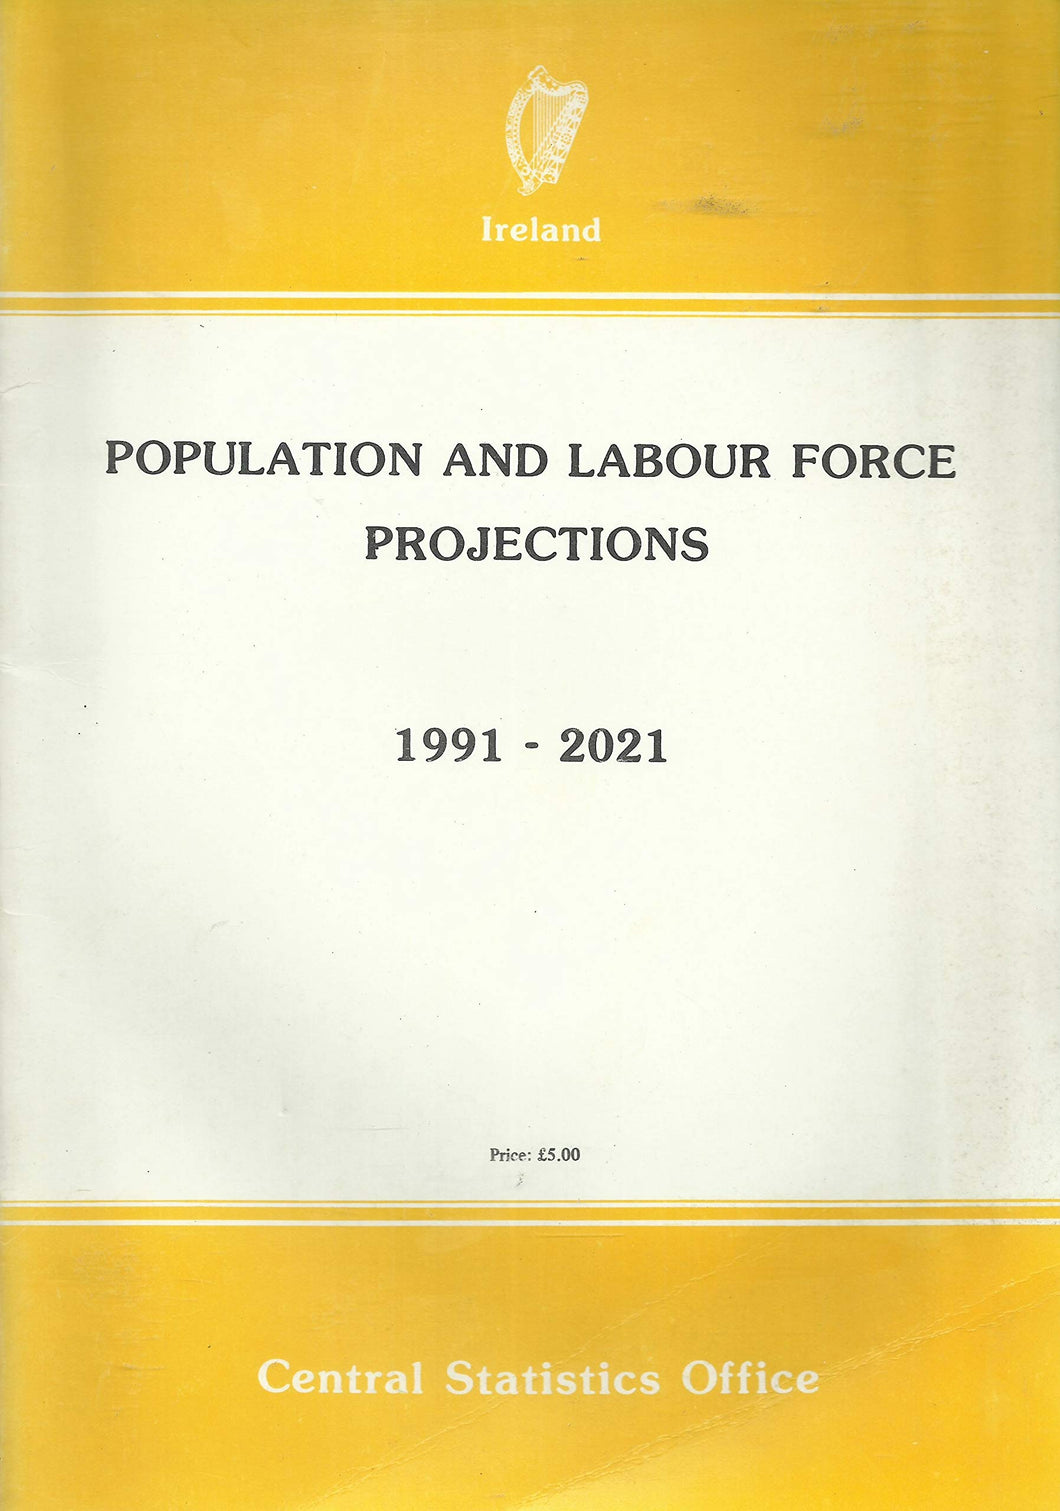 Population and Labour Force Projections 1991-2021 - Central Statistics Office Ireland